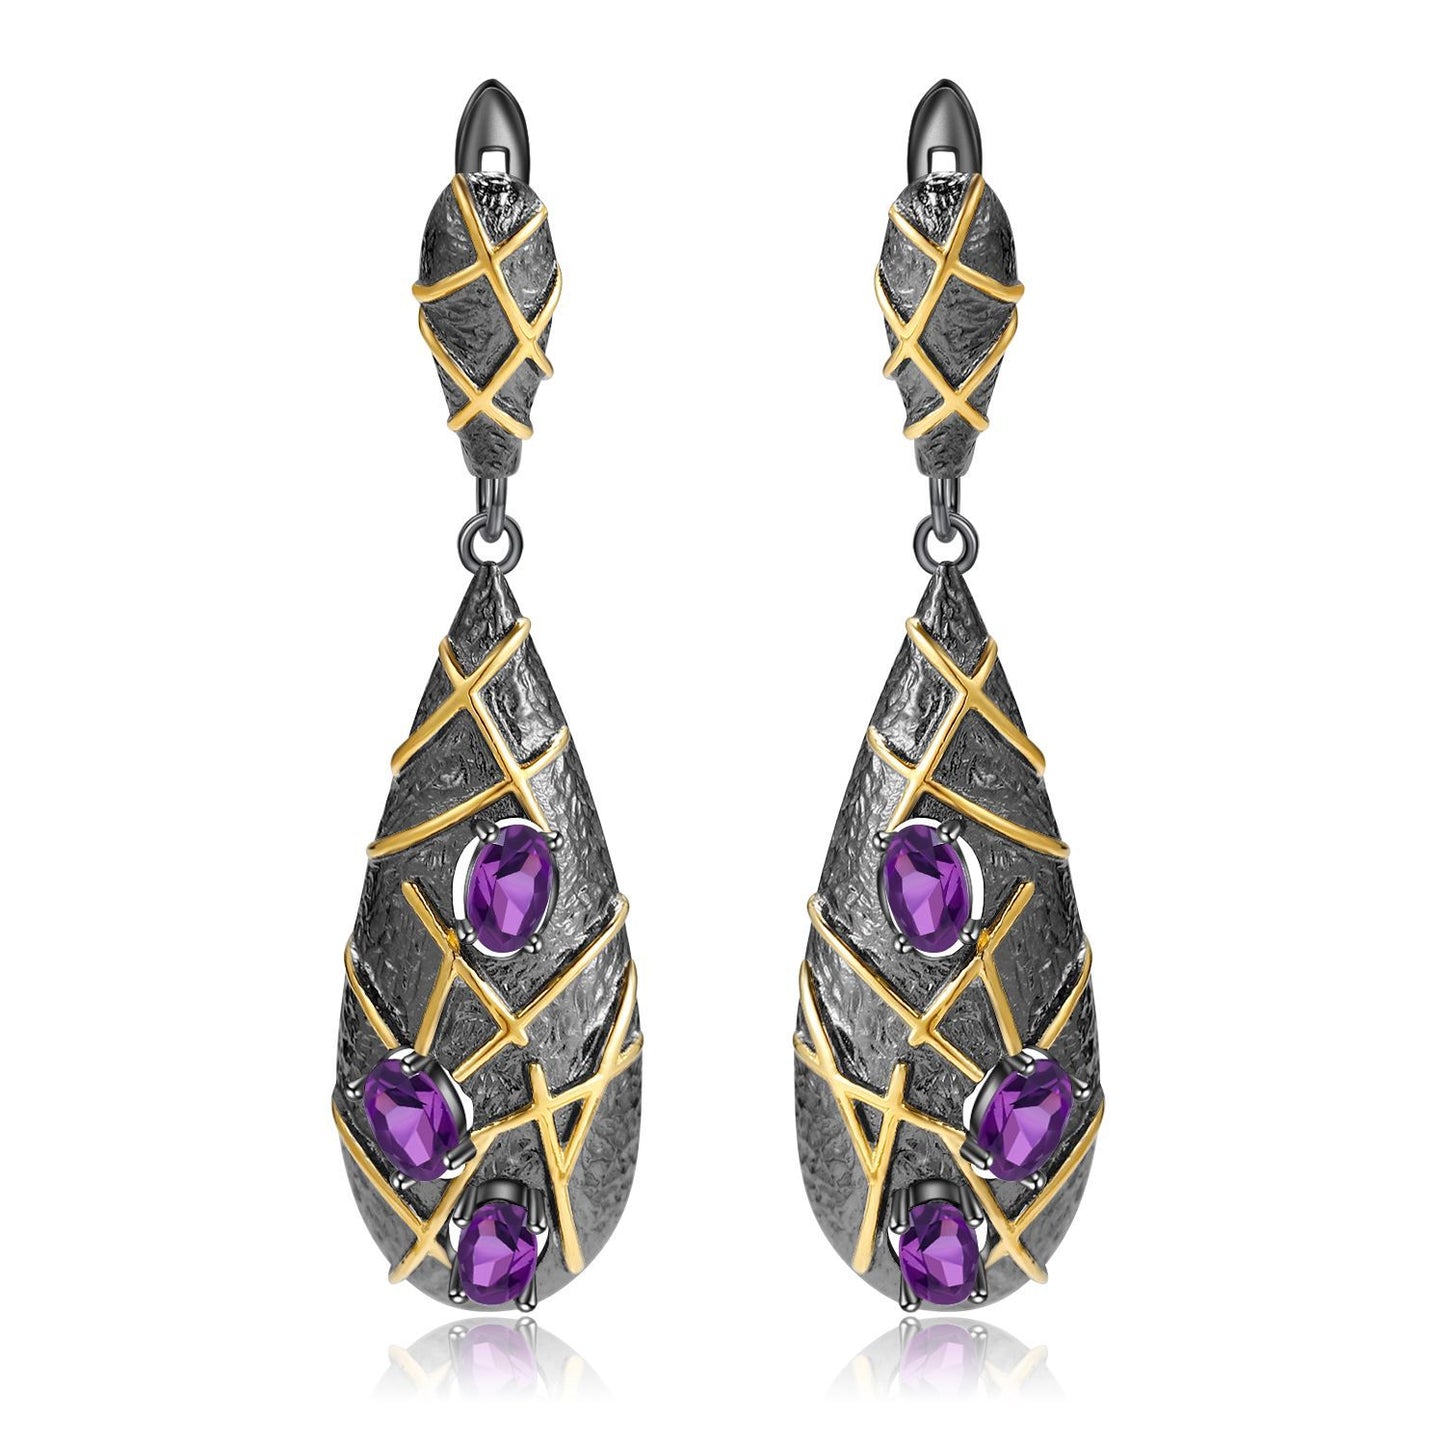 Italian Style Inlaid Colourful Gemstones Water Droplet Sterling Silver Earrings for Women